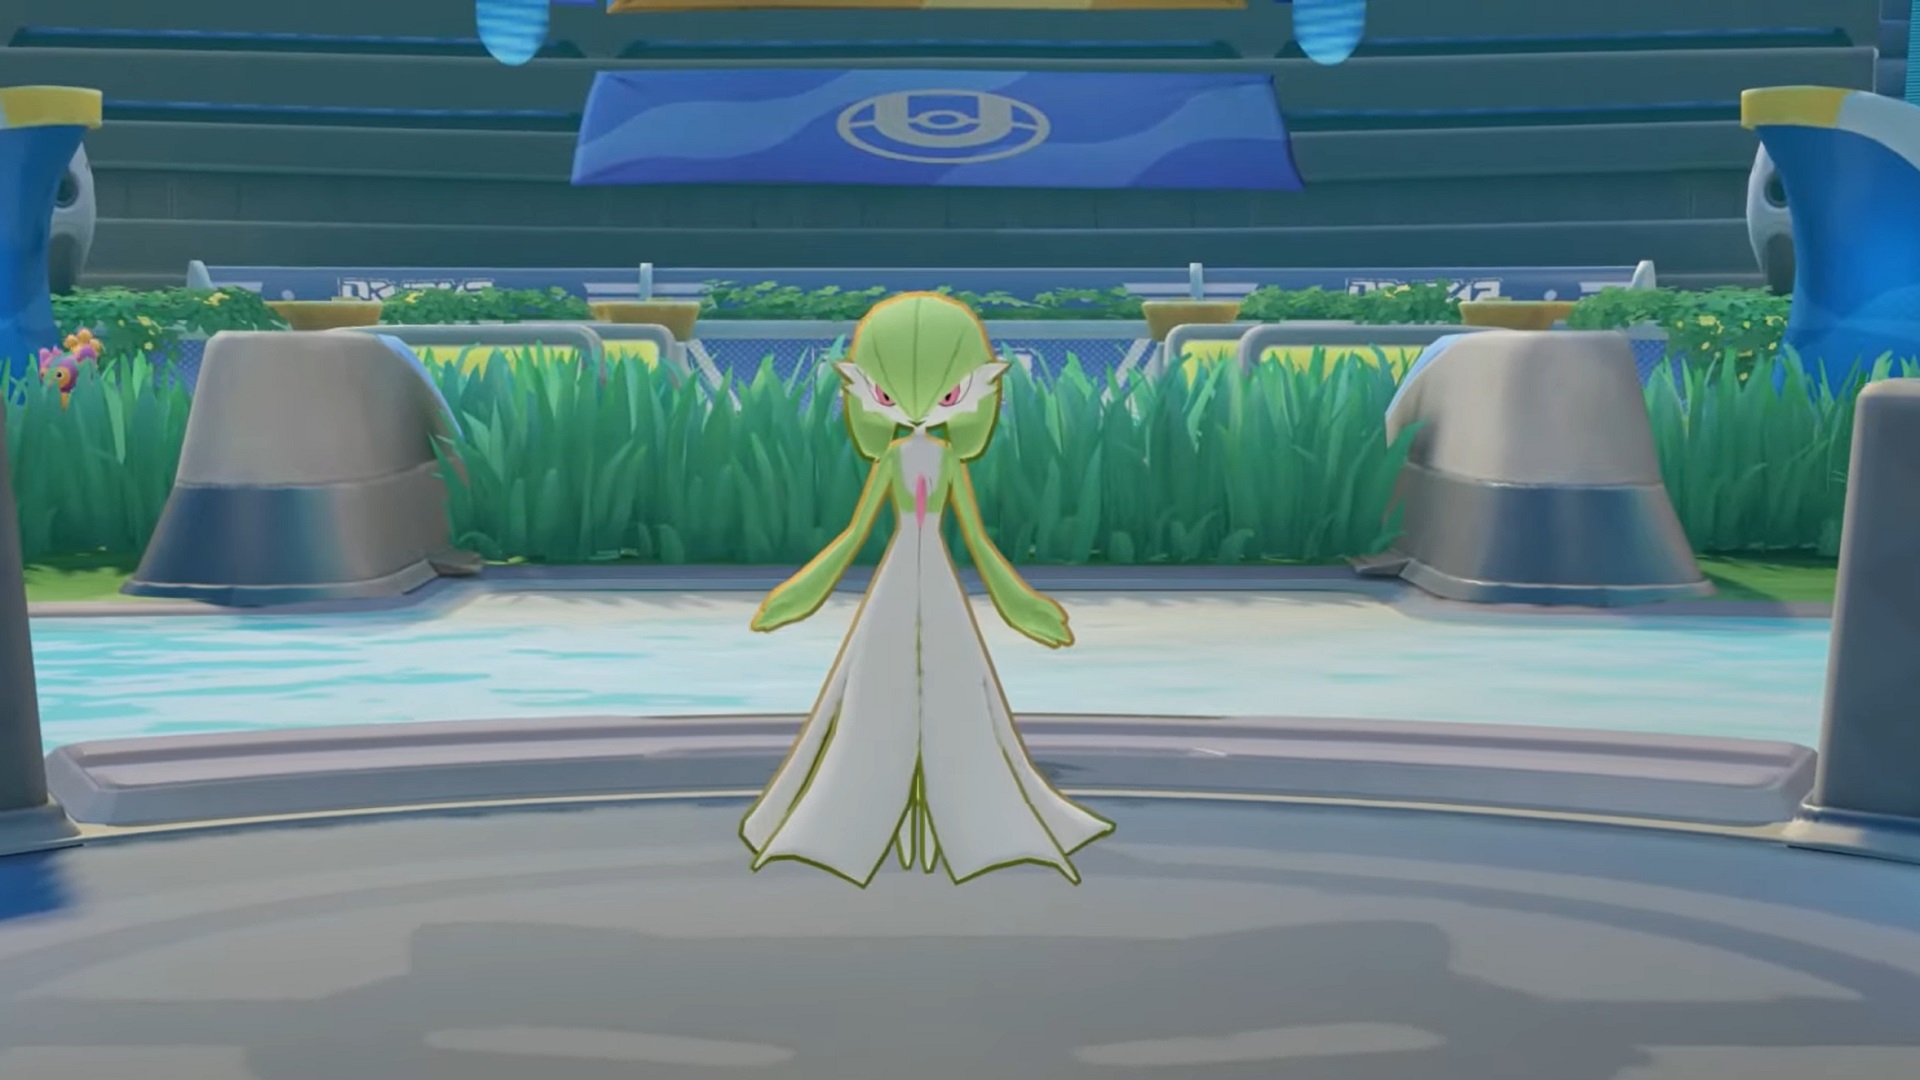 Pokémon UNITE on X: Some details on Gardevoir's stats and moves before it  joins us for Unite Battles starting tomorrow! #PokemonUNITE   / X